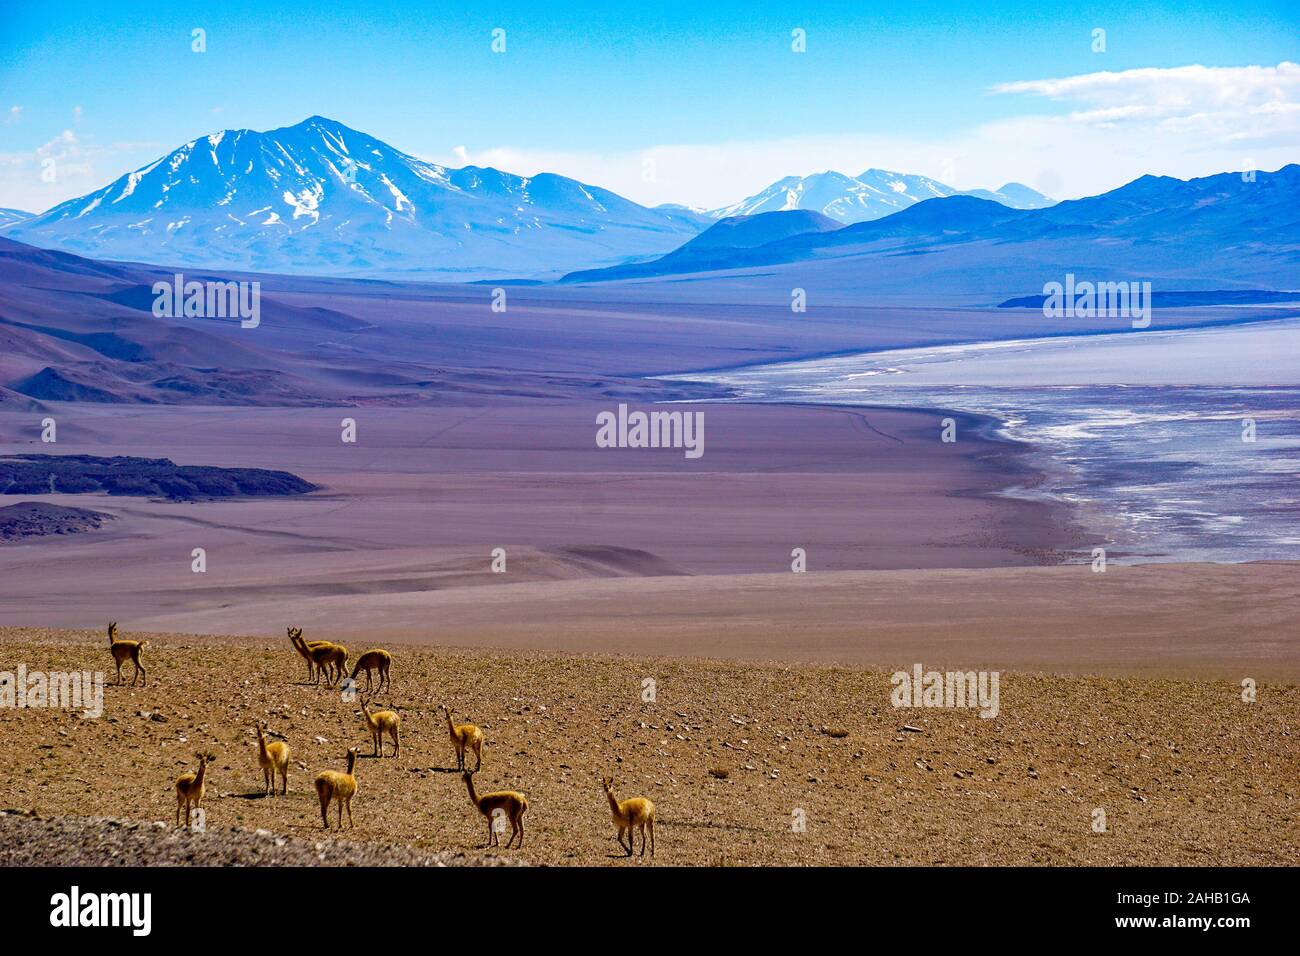 A herd of vicunas stands in front of a the Salar de Arizaro salt lake flats, backed by a snow-capped volcano near Tolar Grande in the high altitude altiplano puna desert near Salta in Argentina Stock Photo